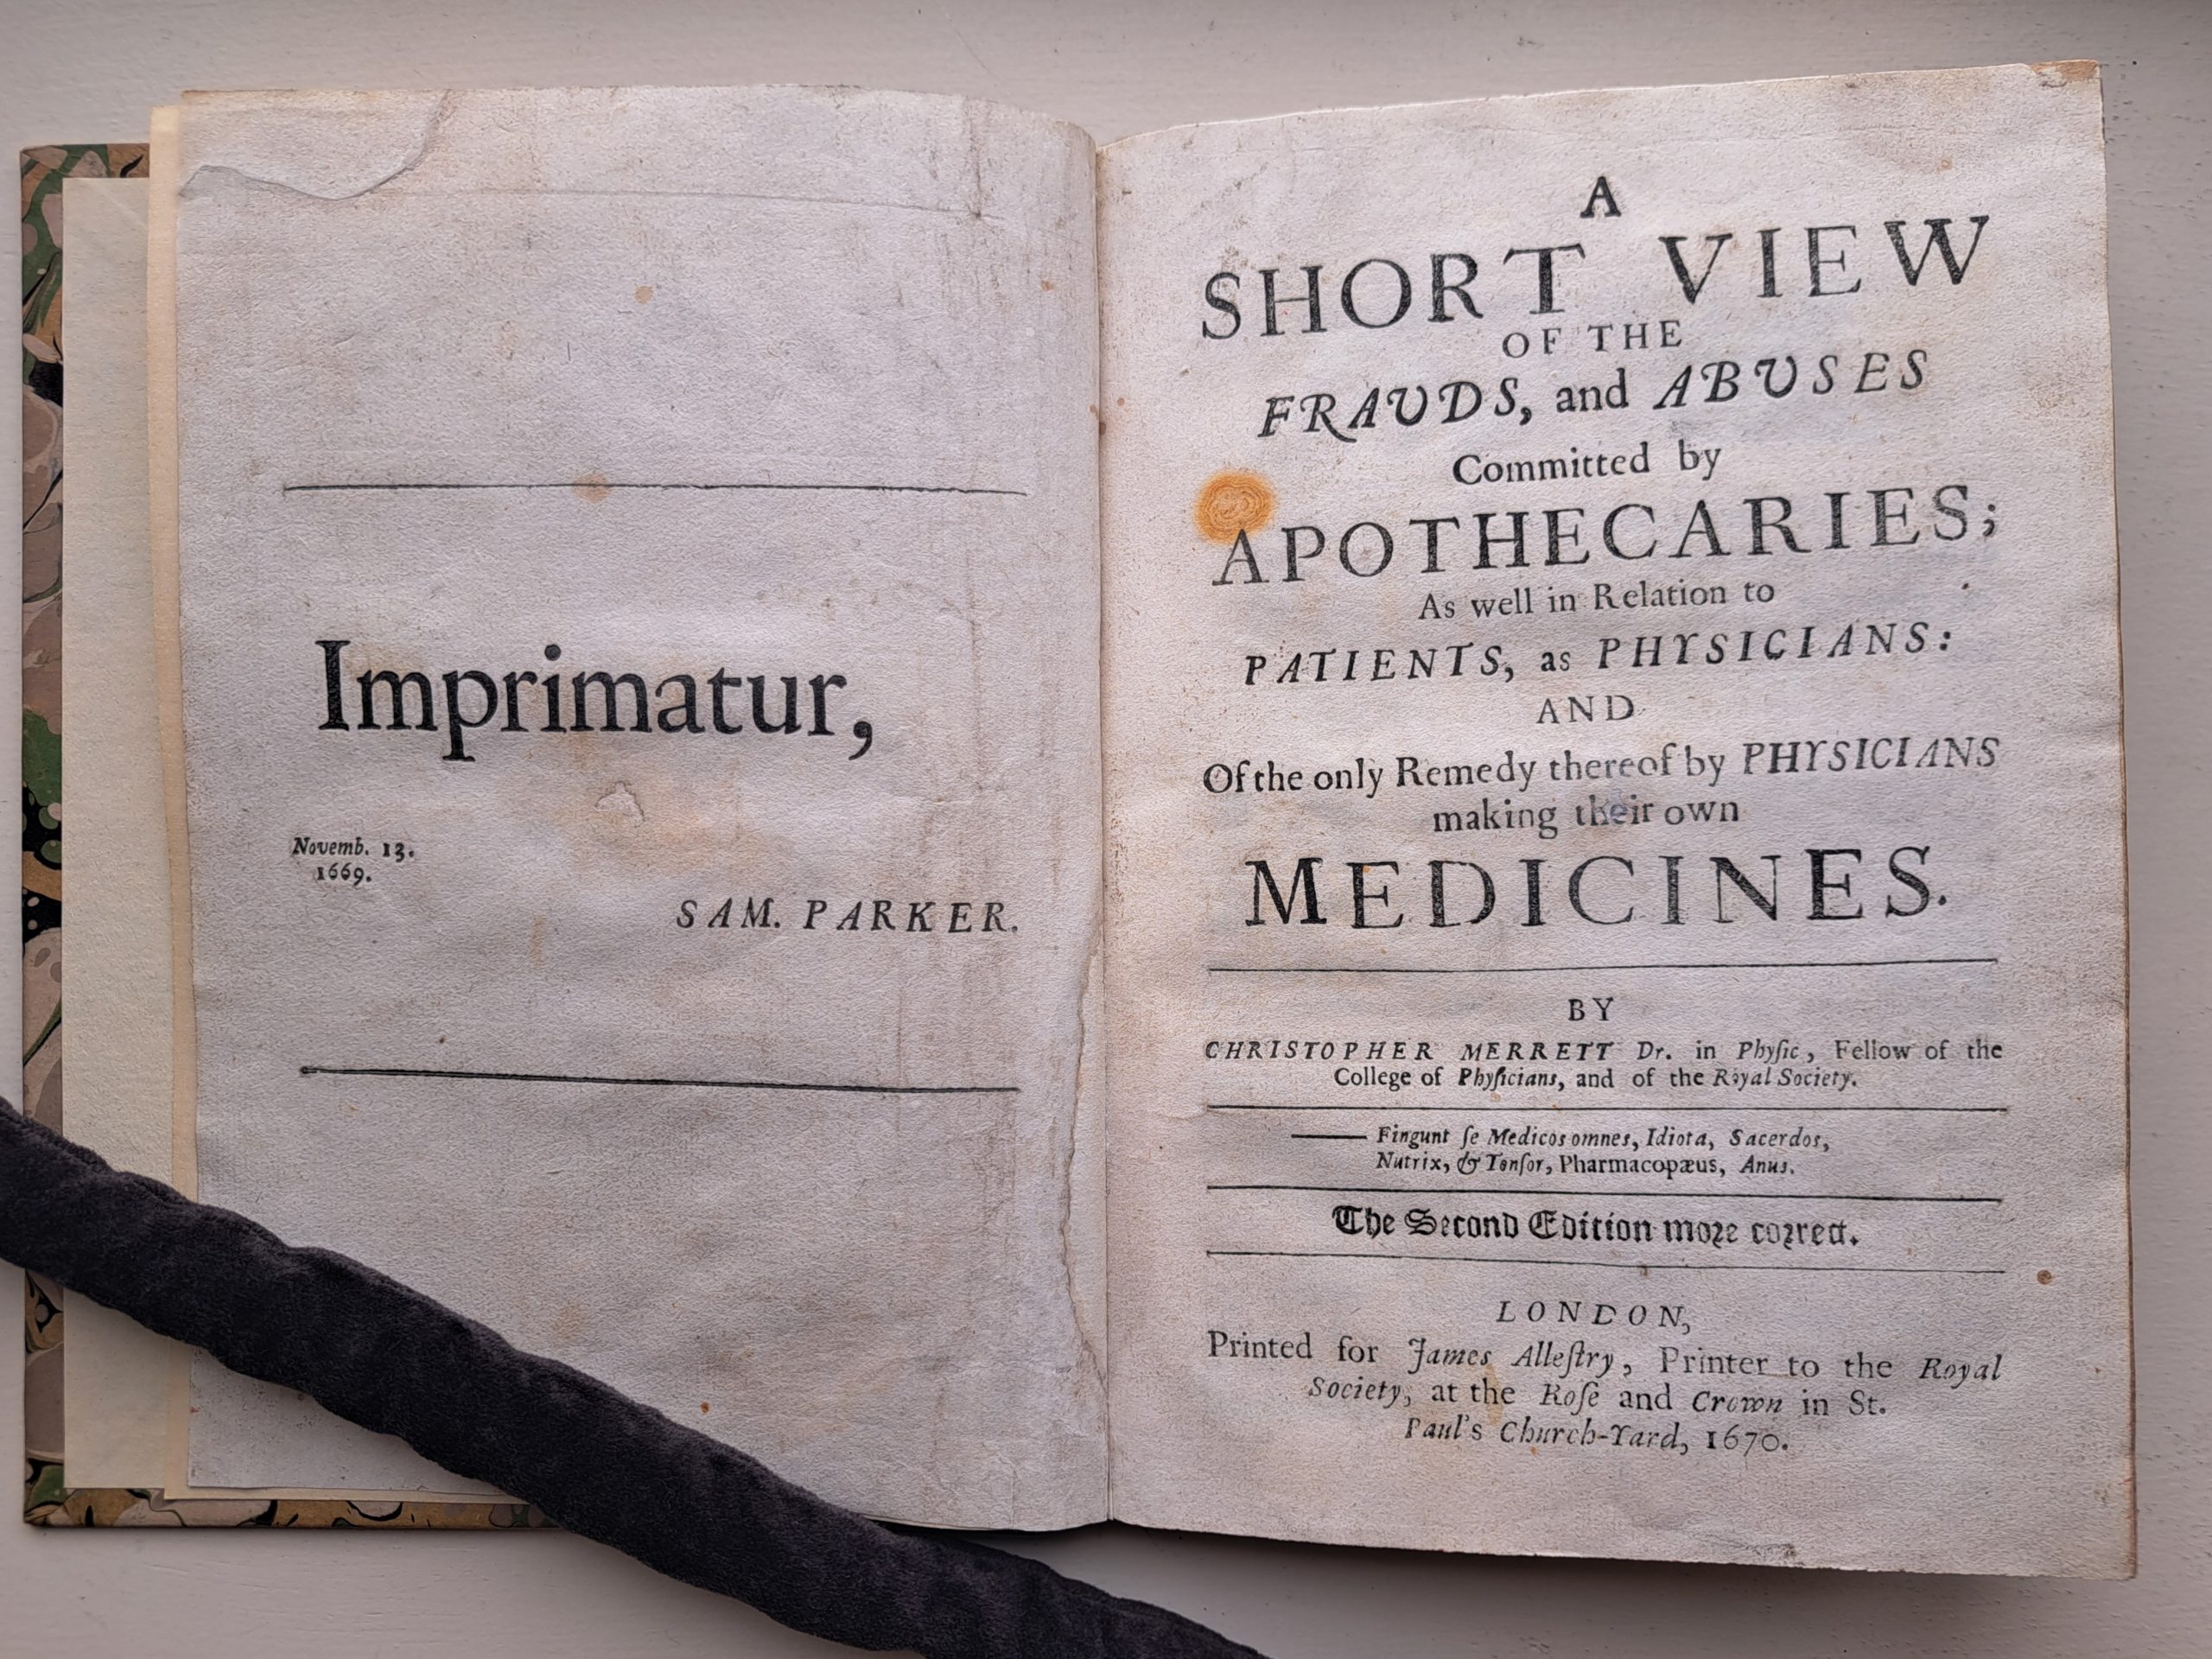 MERRETT, Short View of the Frauds, and Abuses committed by Apothecaries